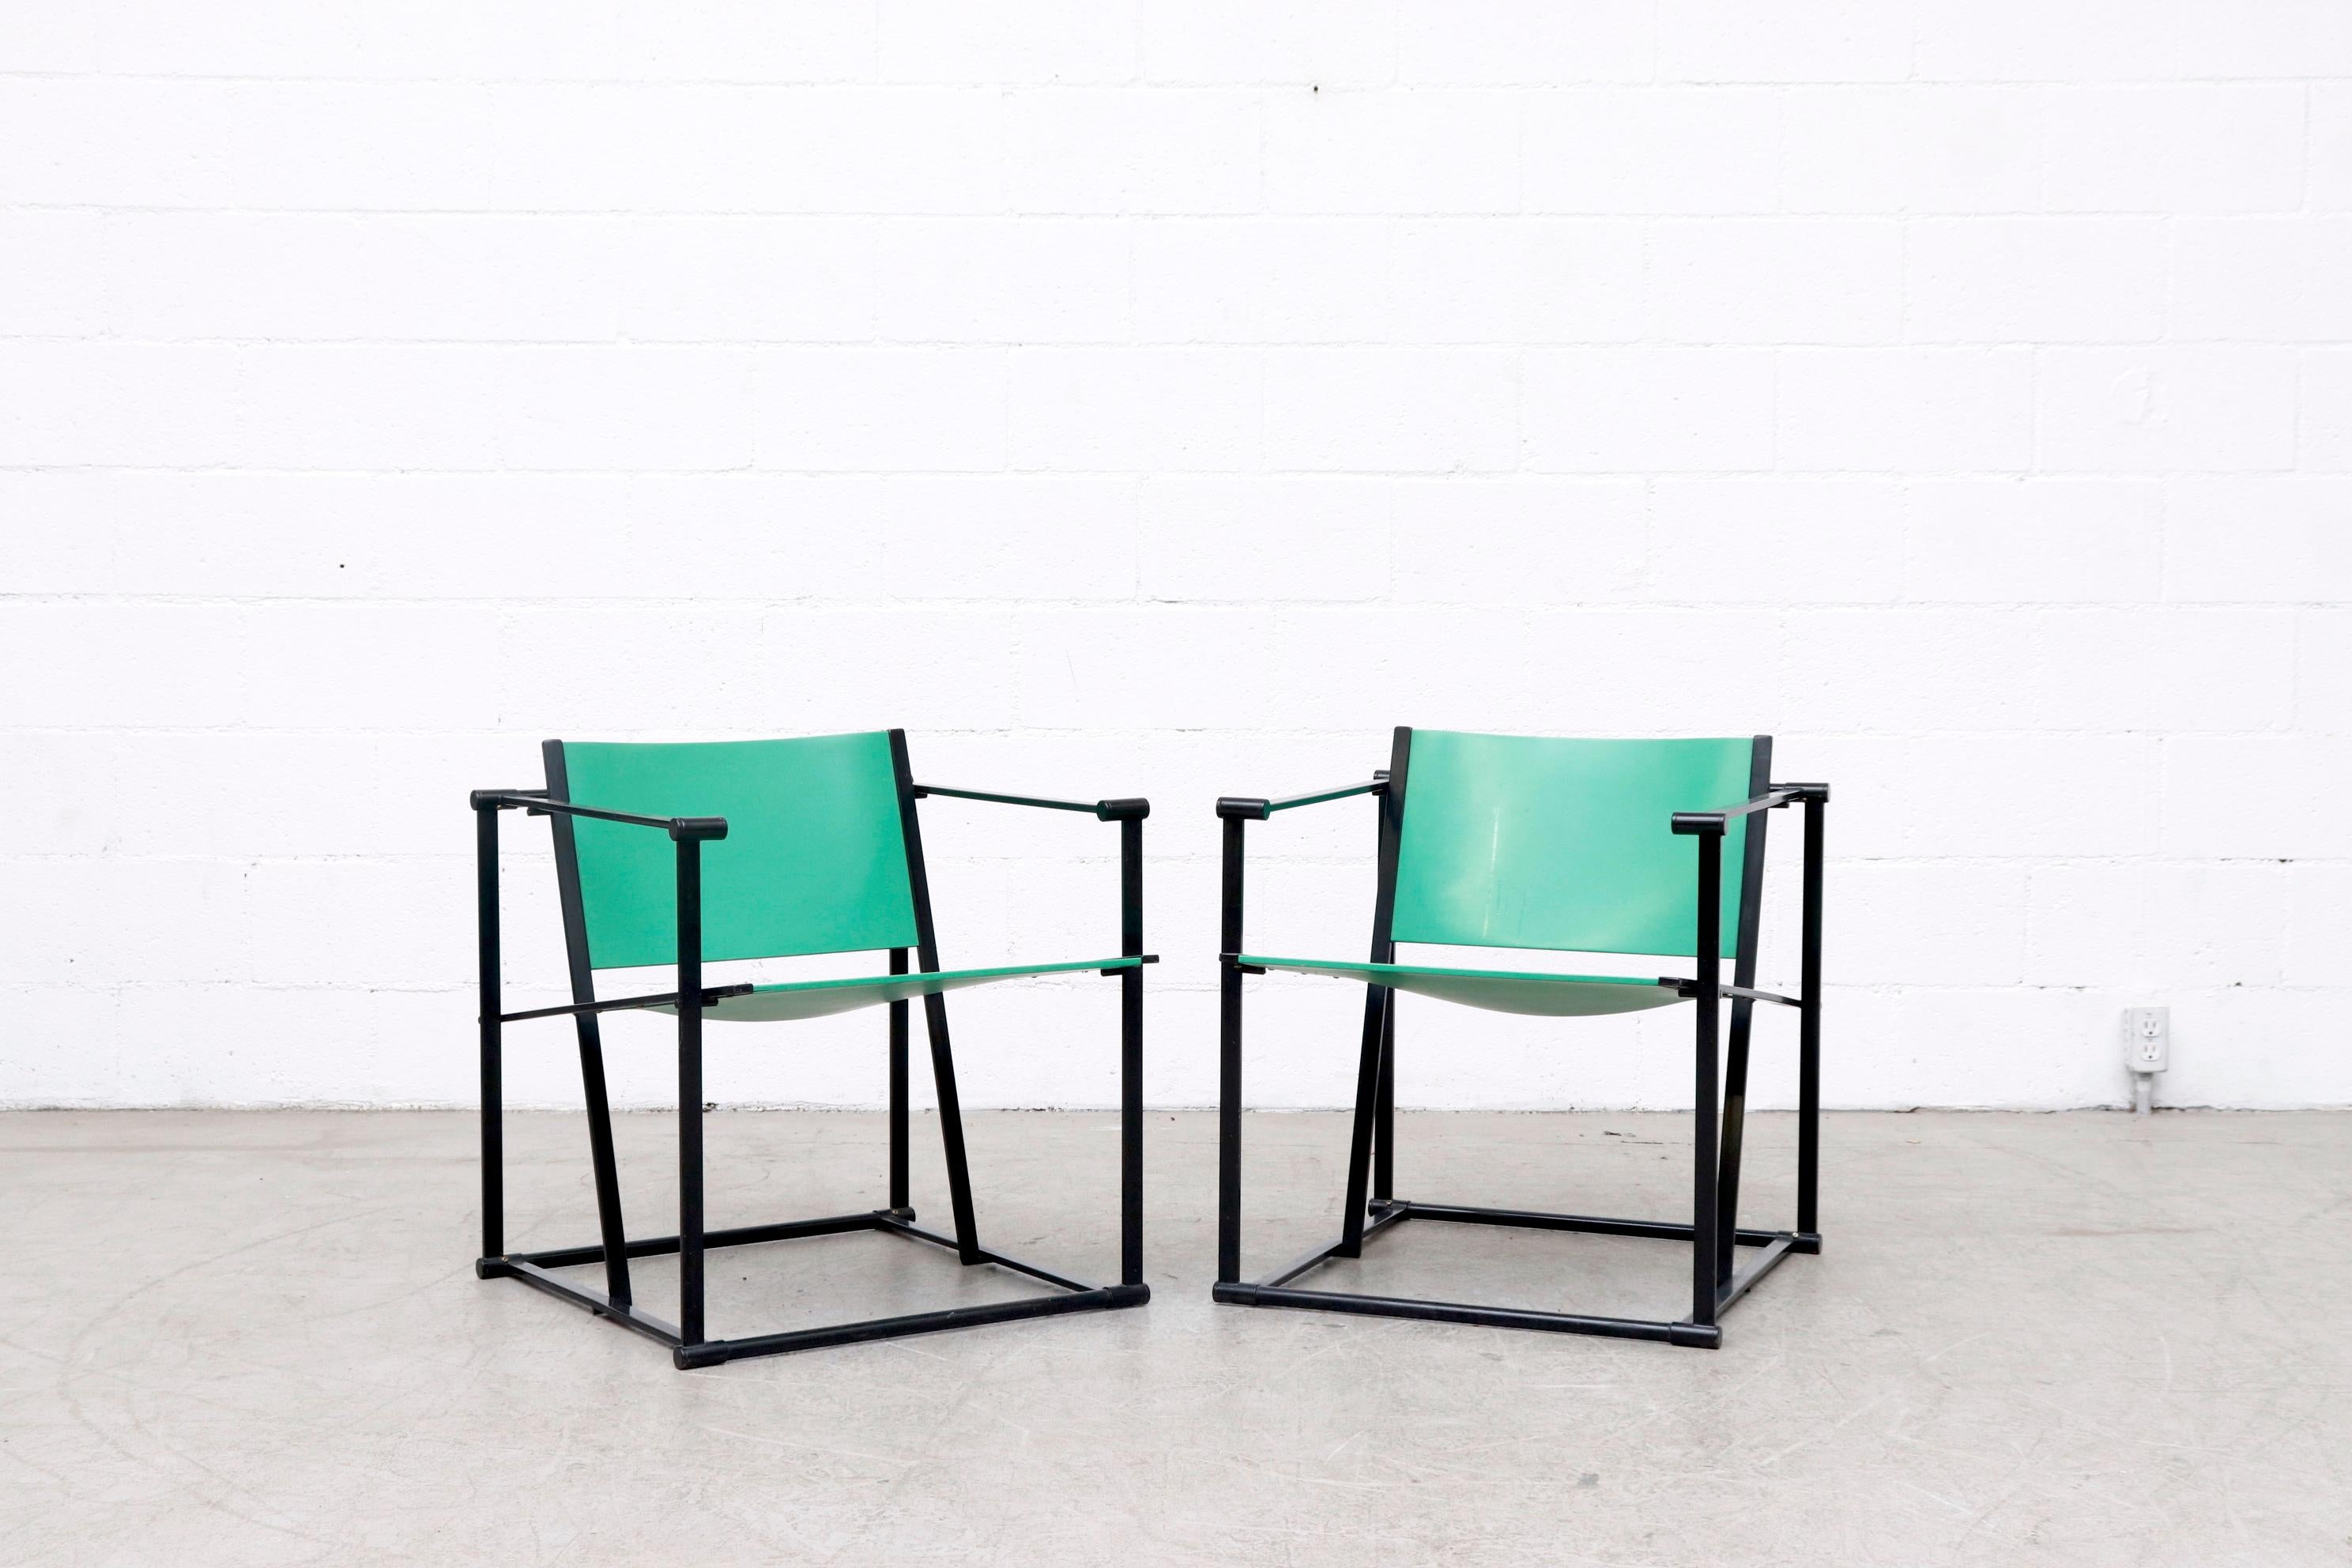 UMS Pastoe FM60, cube lounge chair, designed in 1980 by Radboud Van Beekum for Pastoe. Black enameled steel frame with bright green painted plywood seating. Frame in original condition with some enamel wear, minimal paint loss and light chipping to